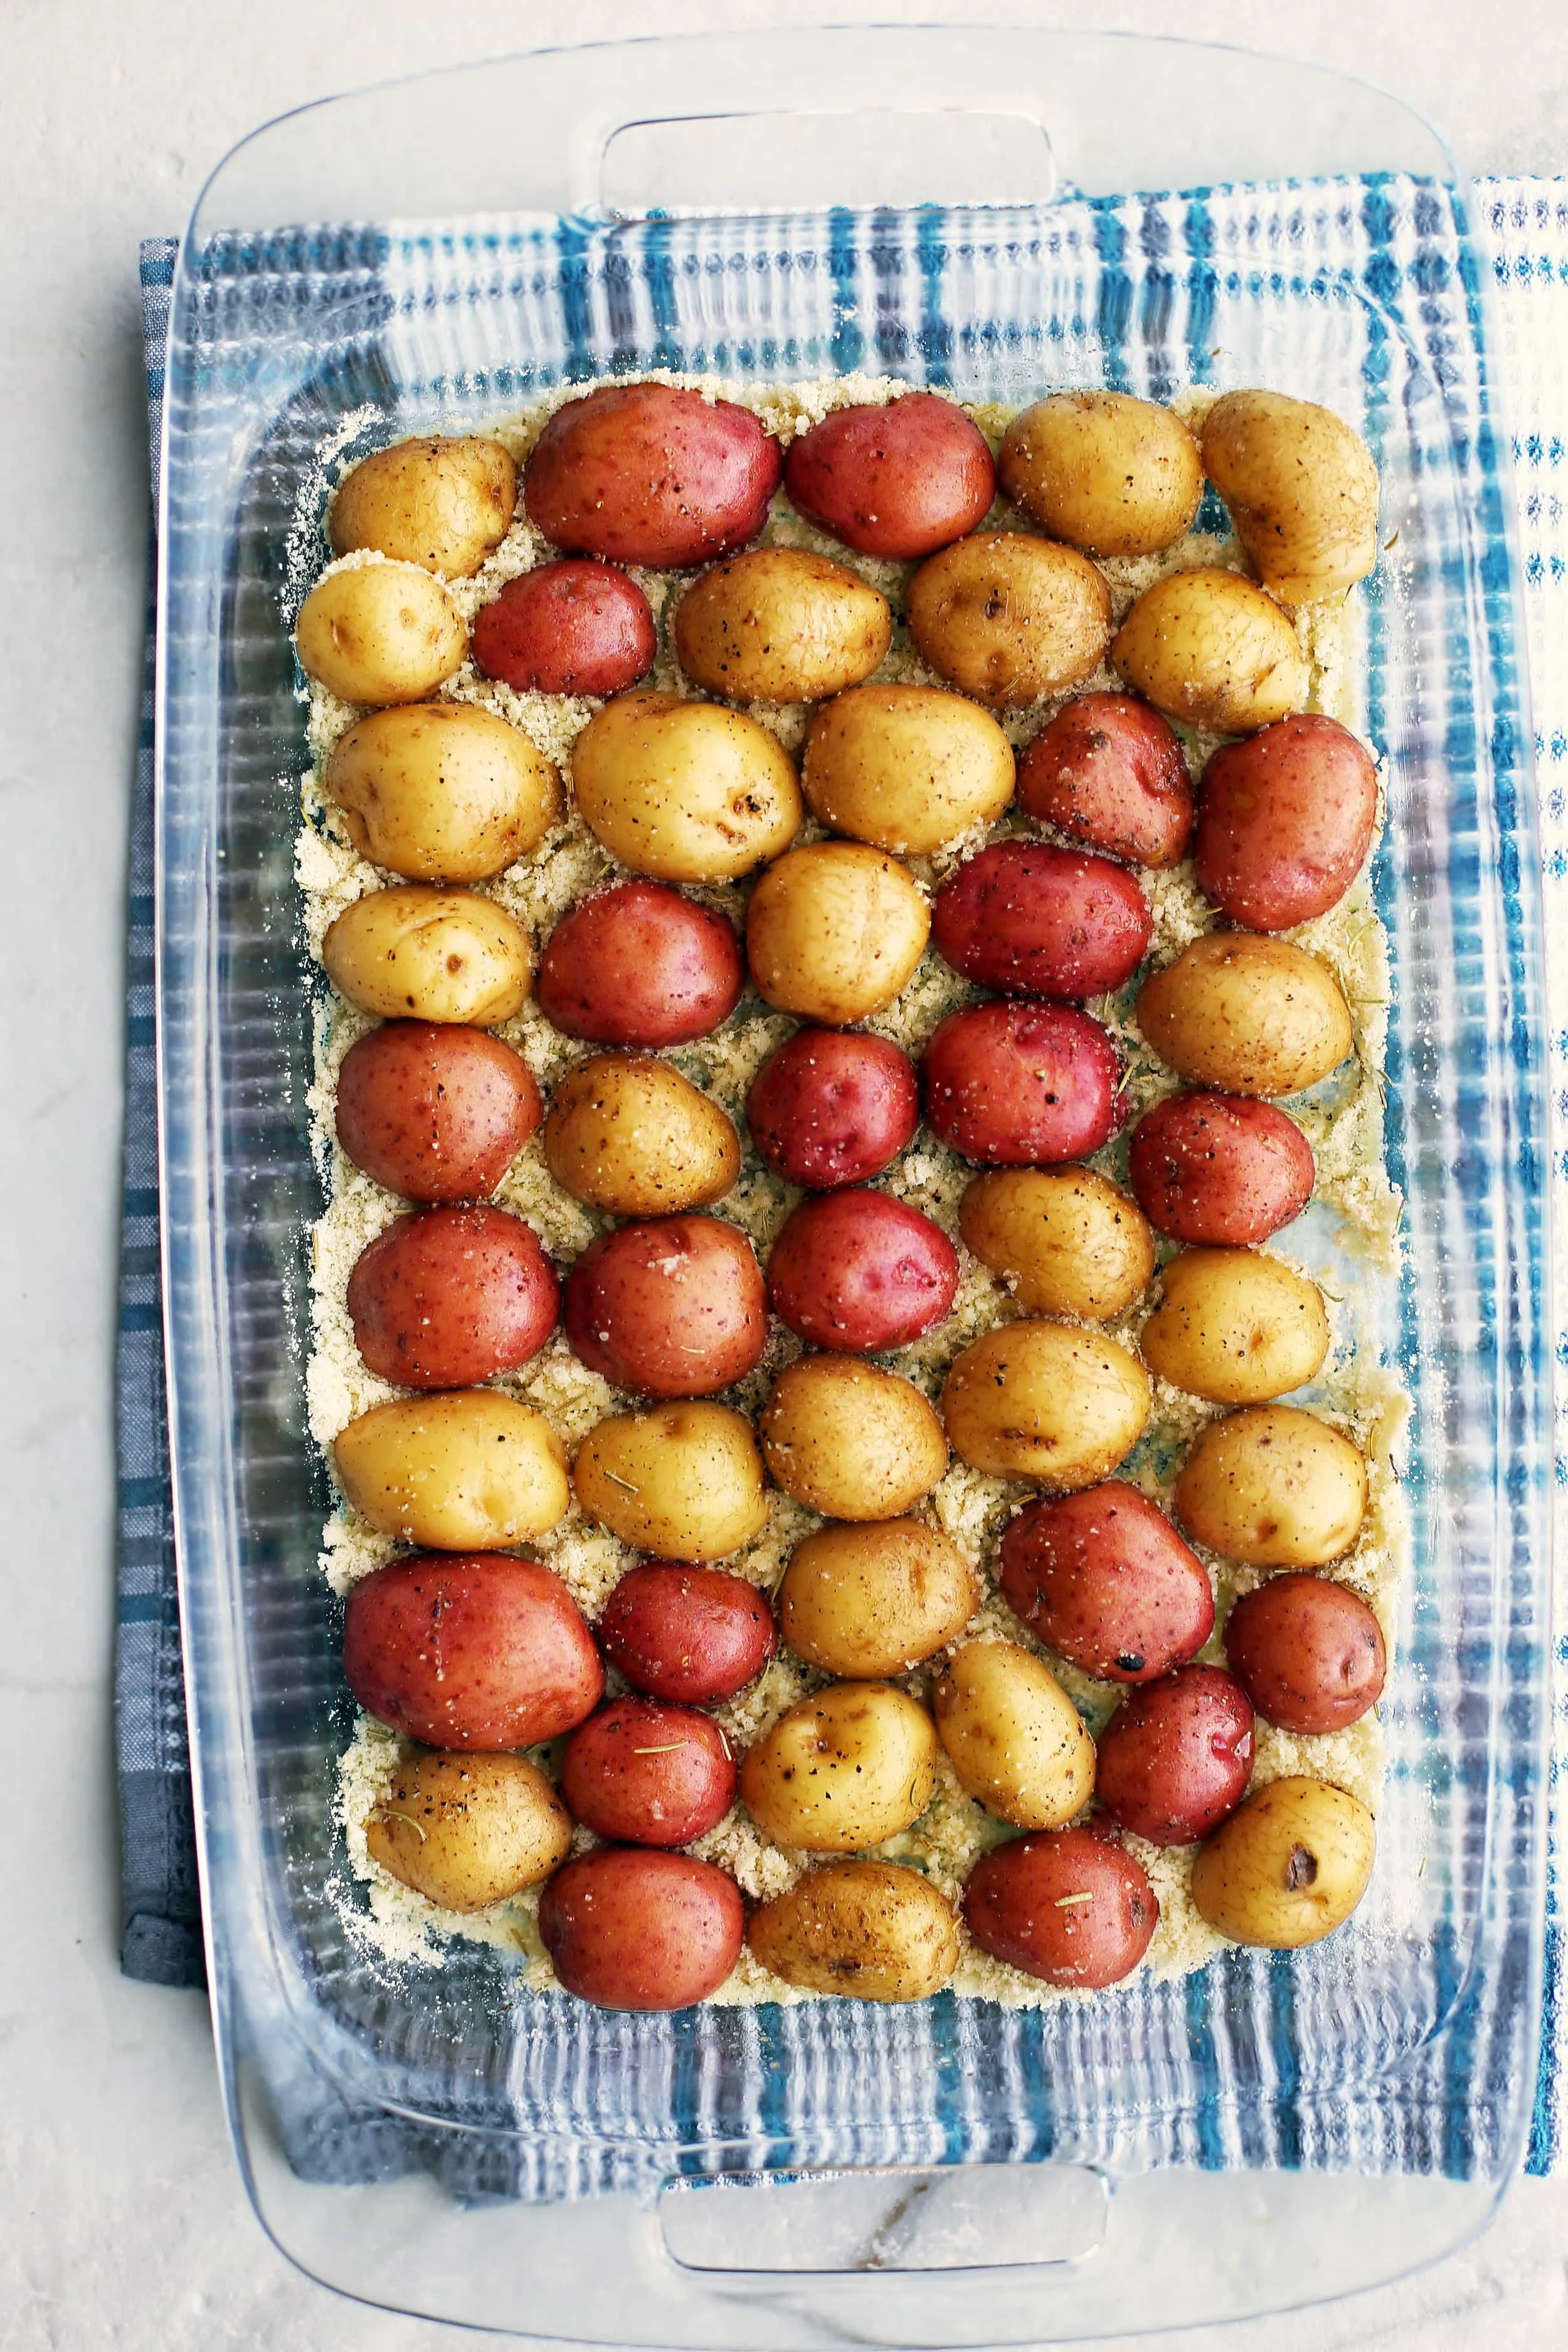 Halved baby potatoes placed cut side down, in a single layer, and pressed into a parmesan cheese mixture in a glass casserole dish that's ready to be baked.